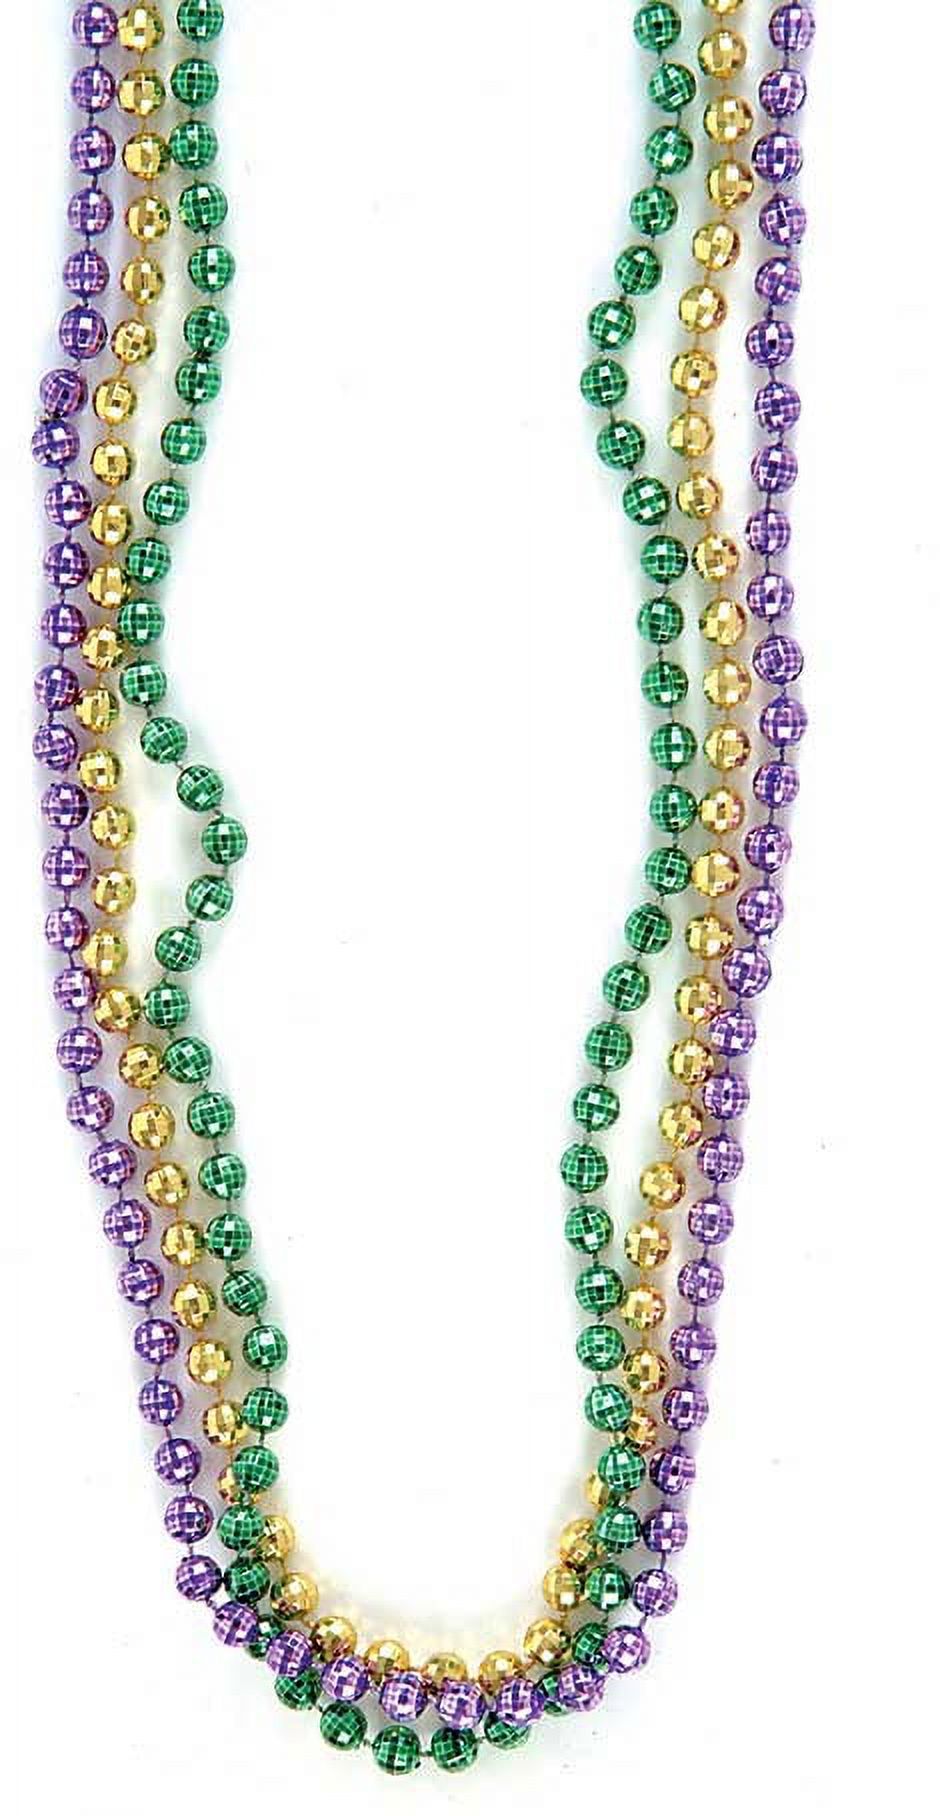 33" 7mm Mardi Gras Disco Ball  Party Beads Necklaces 12ct, Purple Green Gold - image 1 of 2